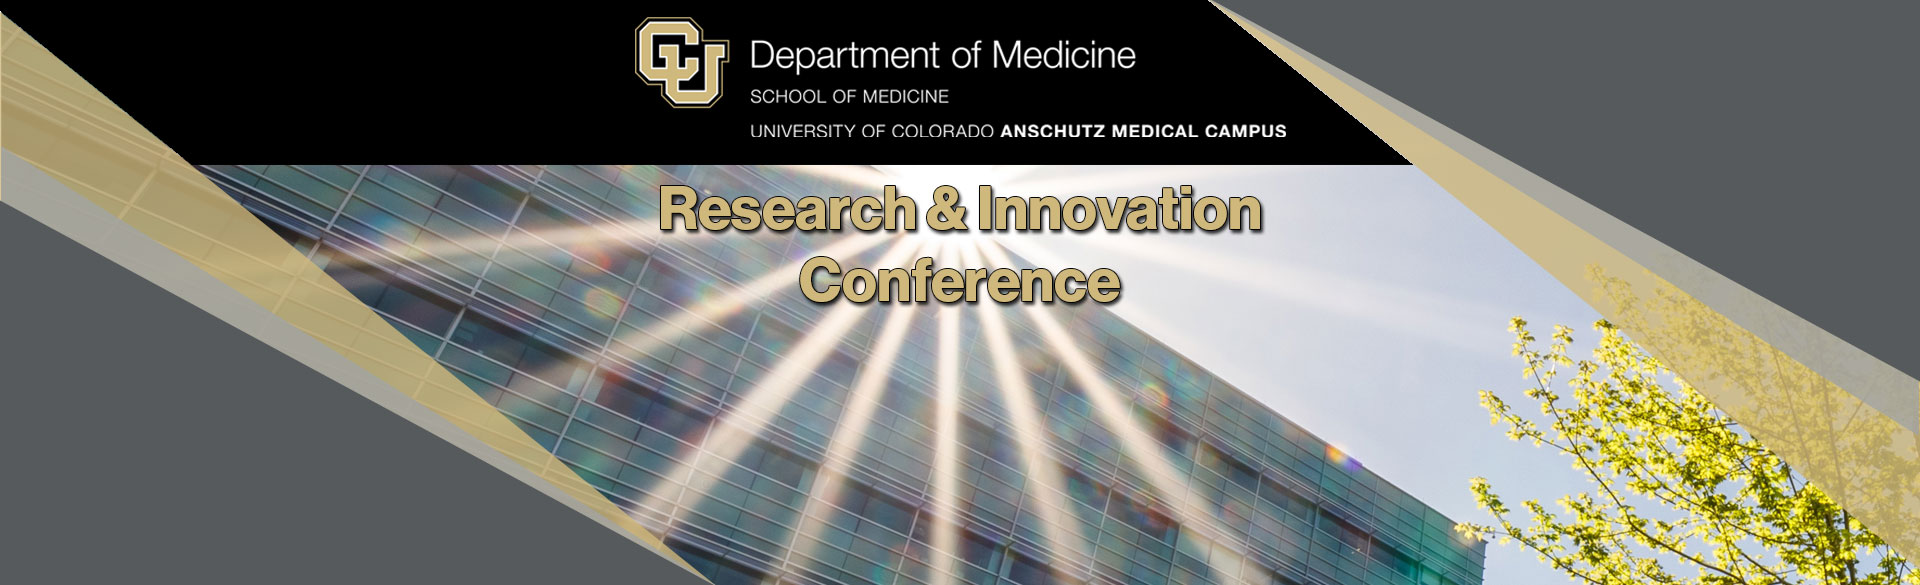 Department of Medicine Research & Innovation Conference